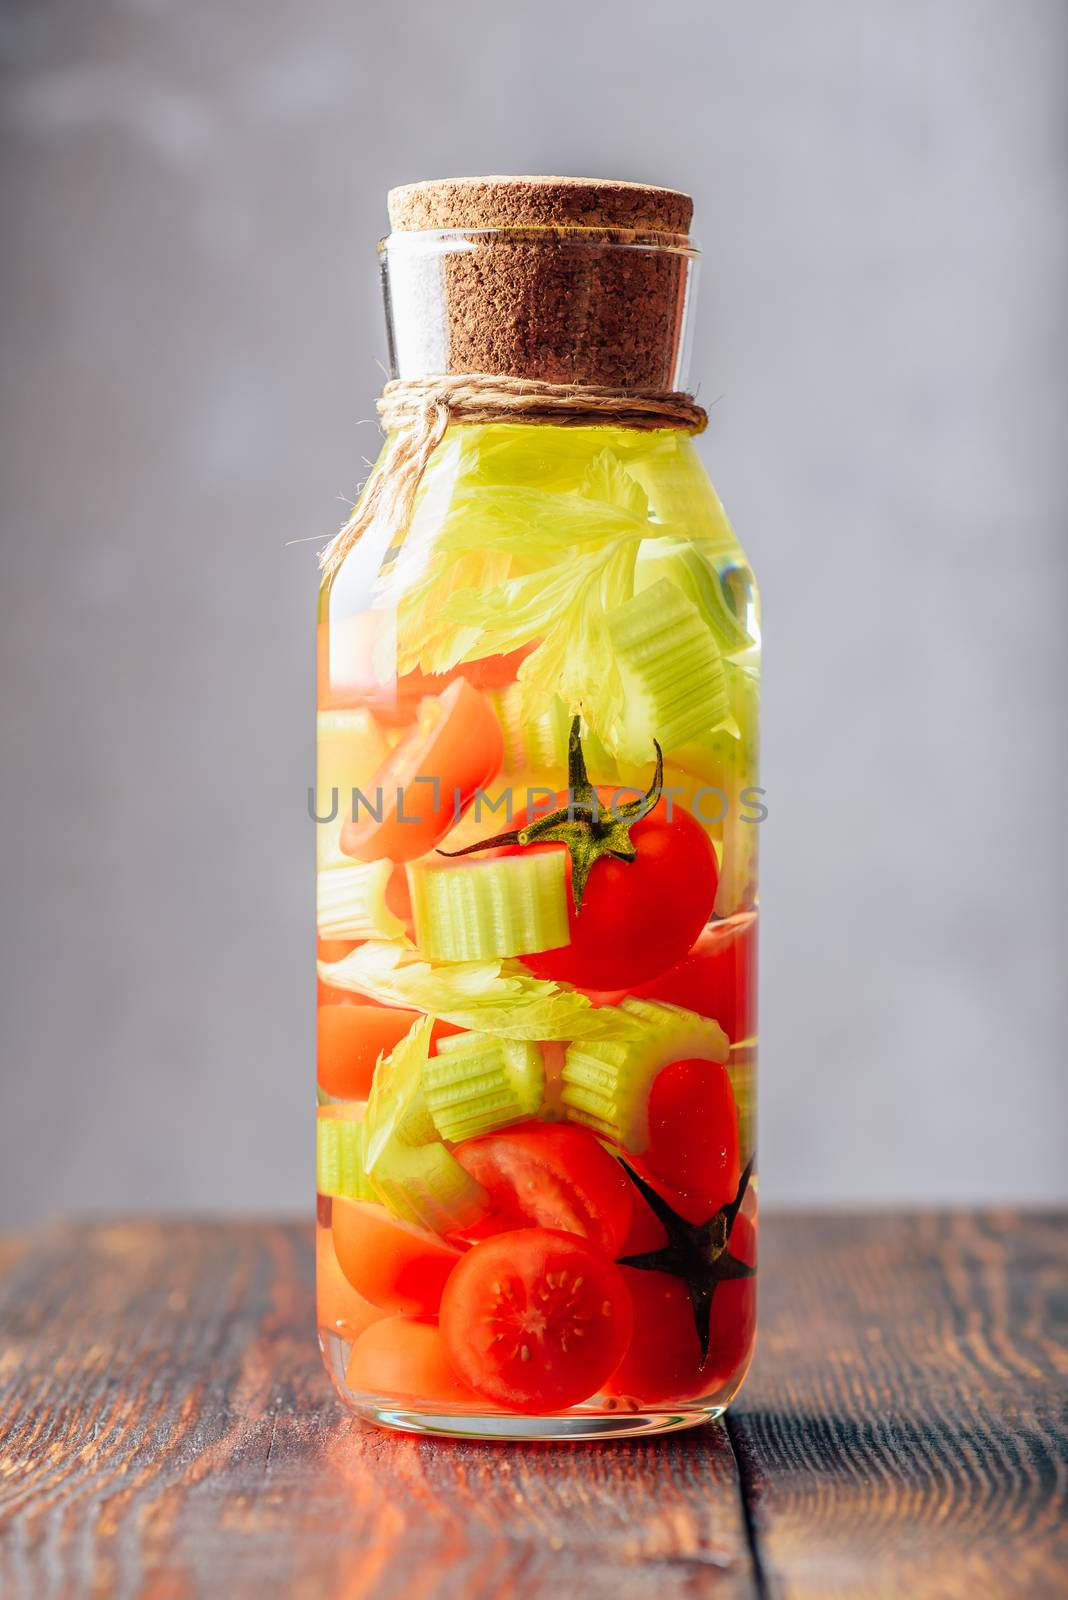 Bottle of Detox Water with Cherry Tomato and Celery Stems. Vertical Orientation.